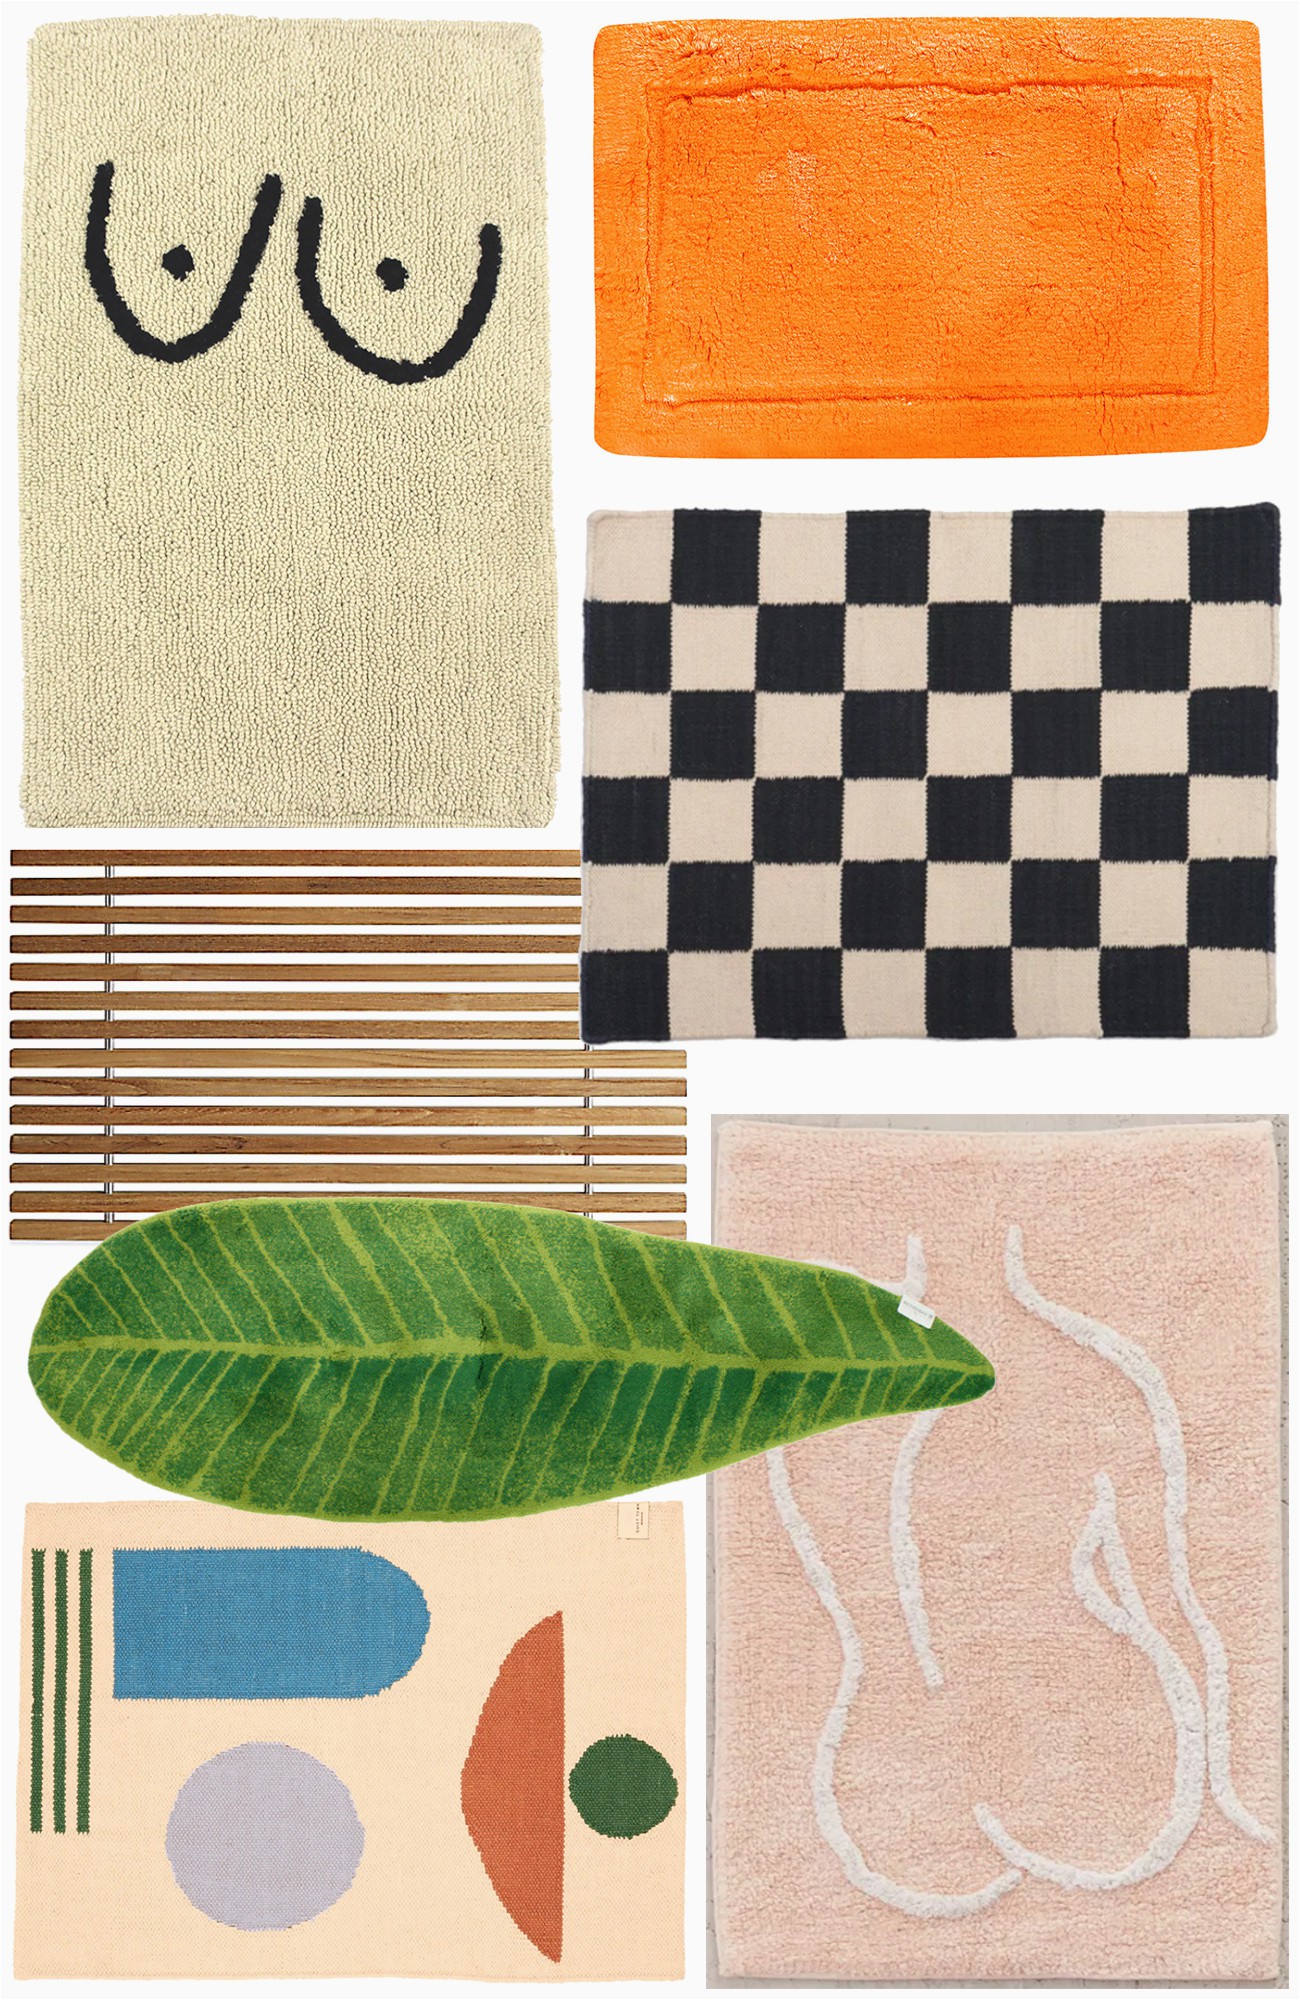 At Home Bath Rugs the Best Bath Mats some Cool In Home Shops the Stripe